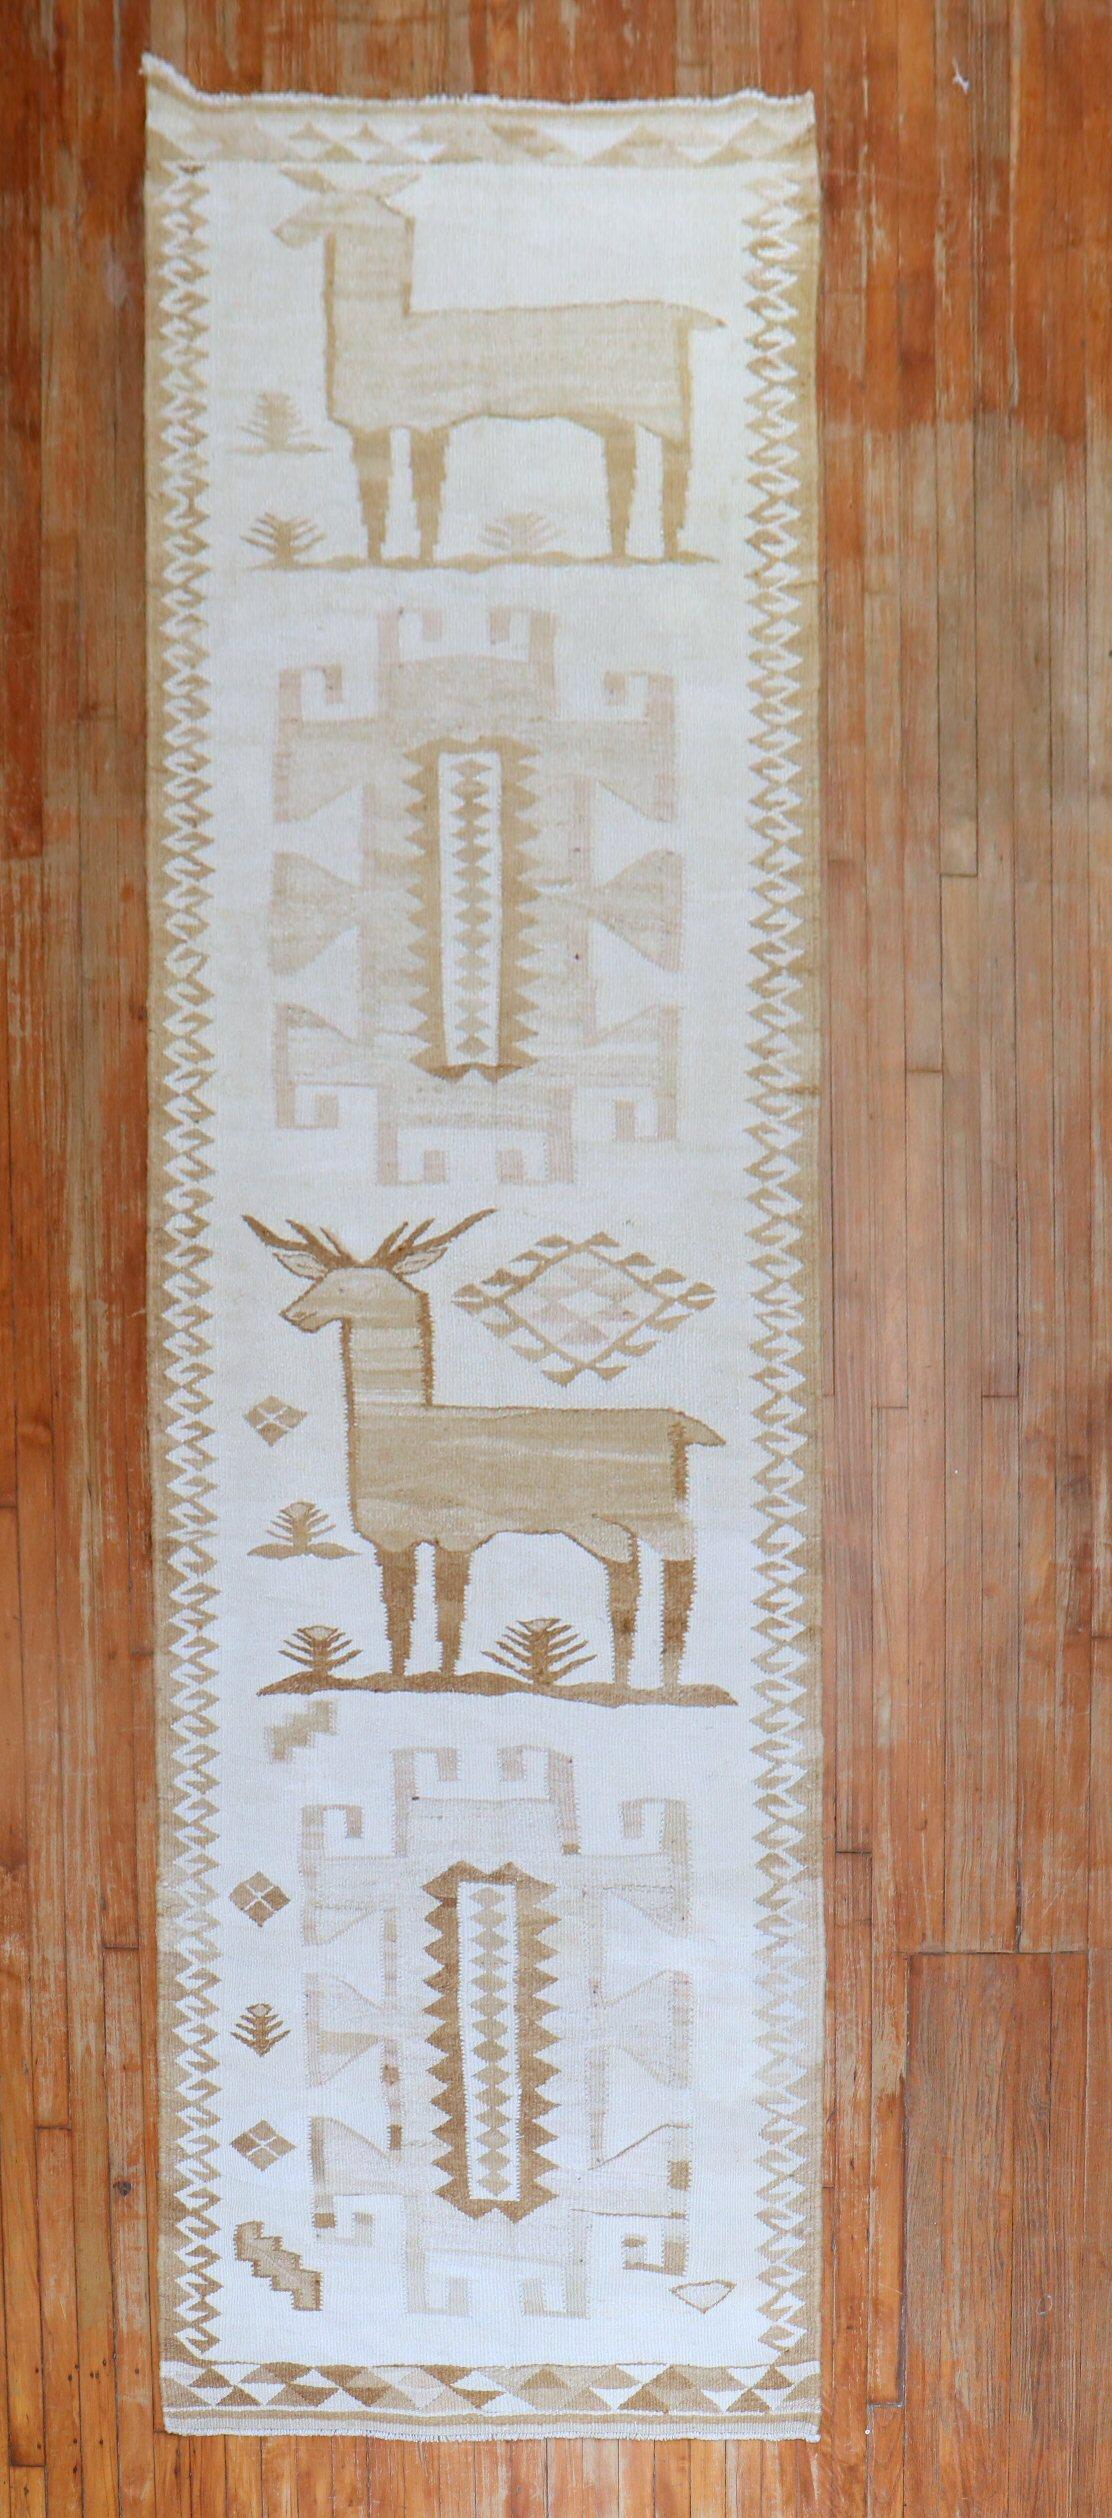 A rare mid-20th century one-of-a-kind Turkish pictorial goat flatweave runner

Measures: 3'5'' x 12'5''.